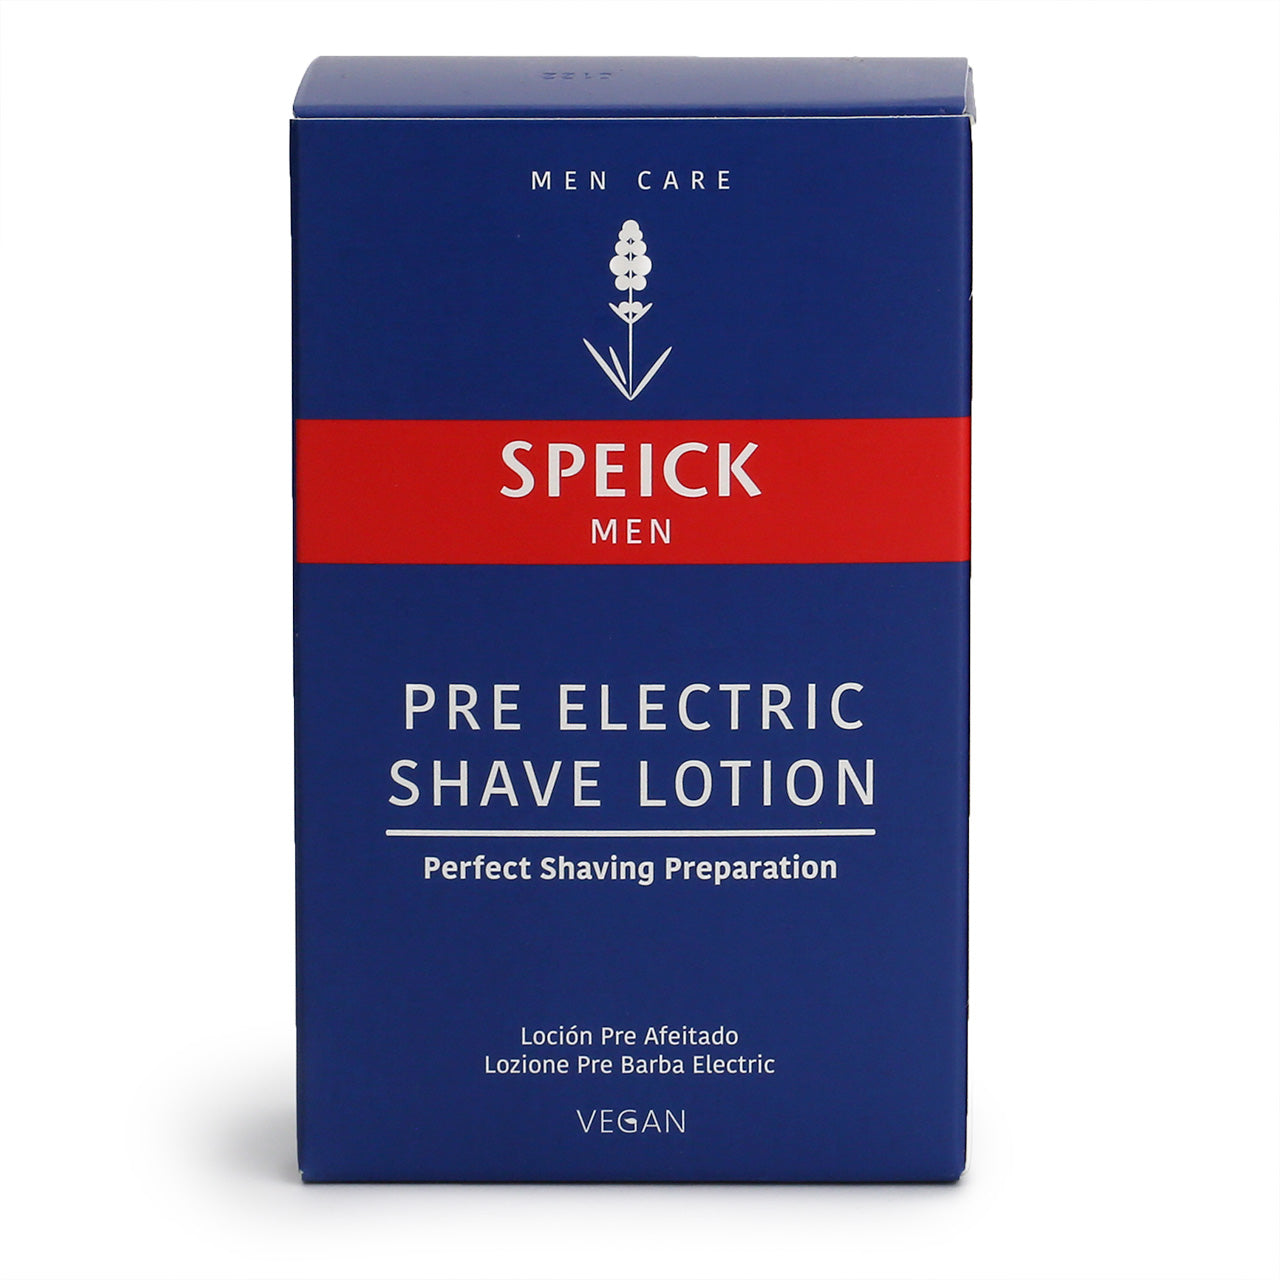 Speick Men Pre-Electric is a splash type solution for using on the face before shaving with an electric shaver. The bottle is clear with a silver lid and red and blue label